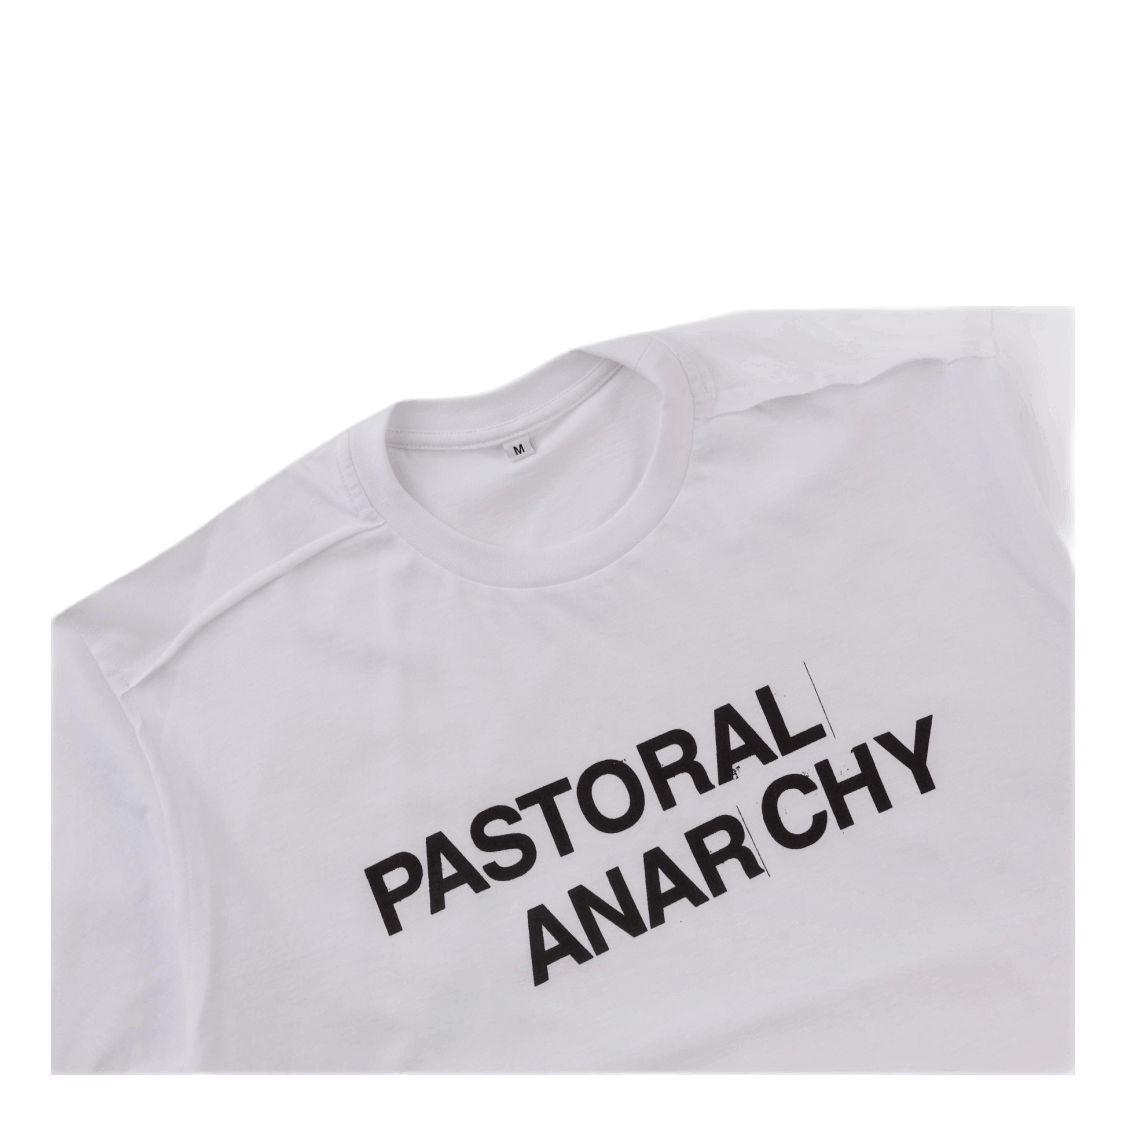 Pastoral Anarchy Tee White